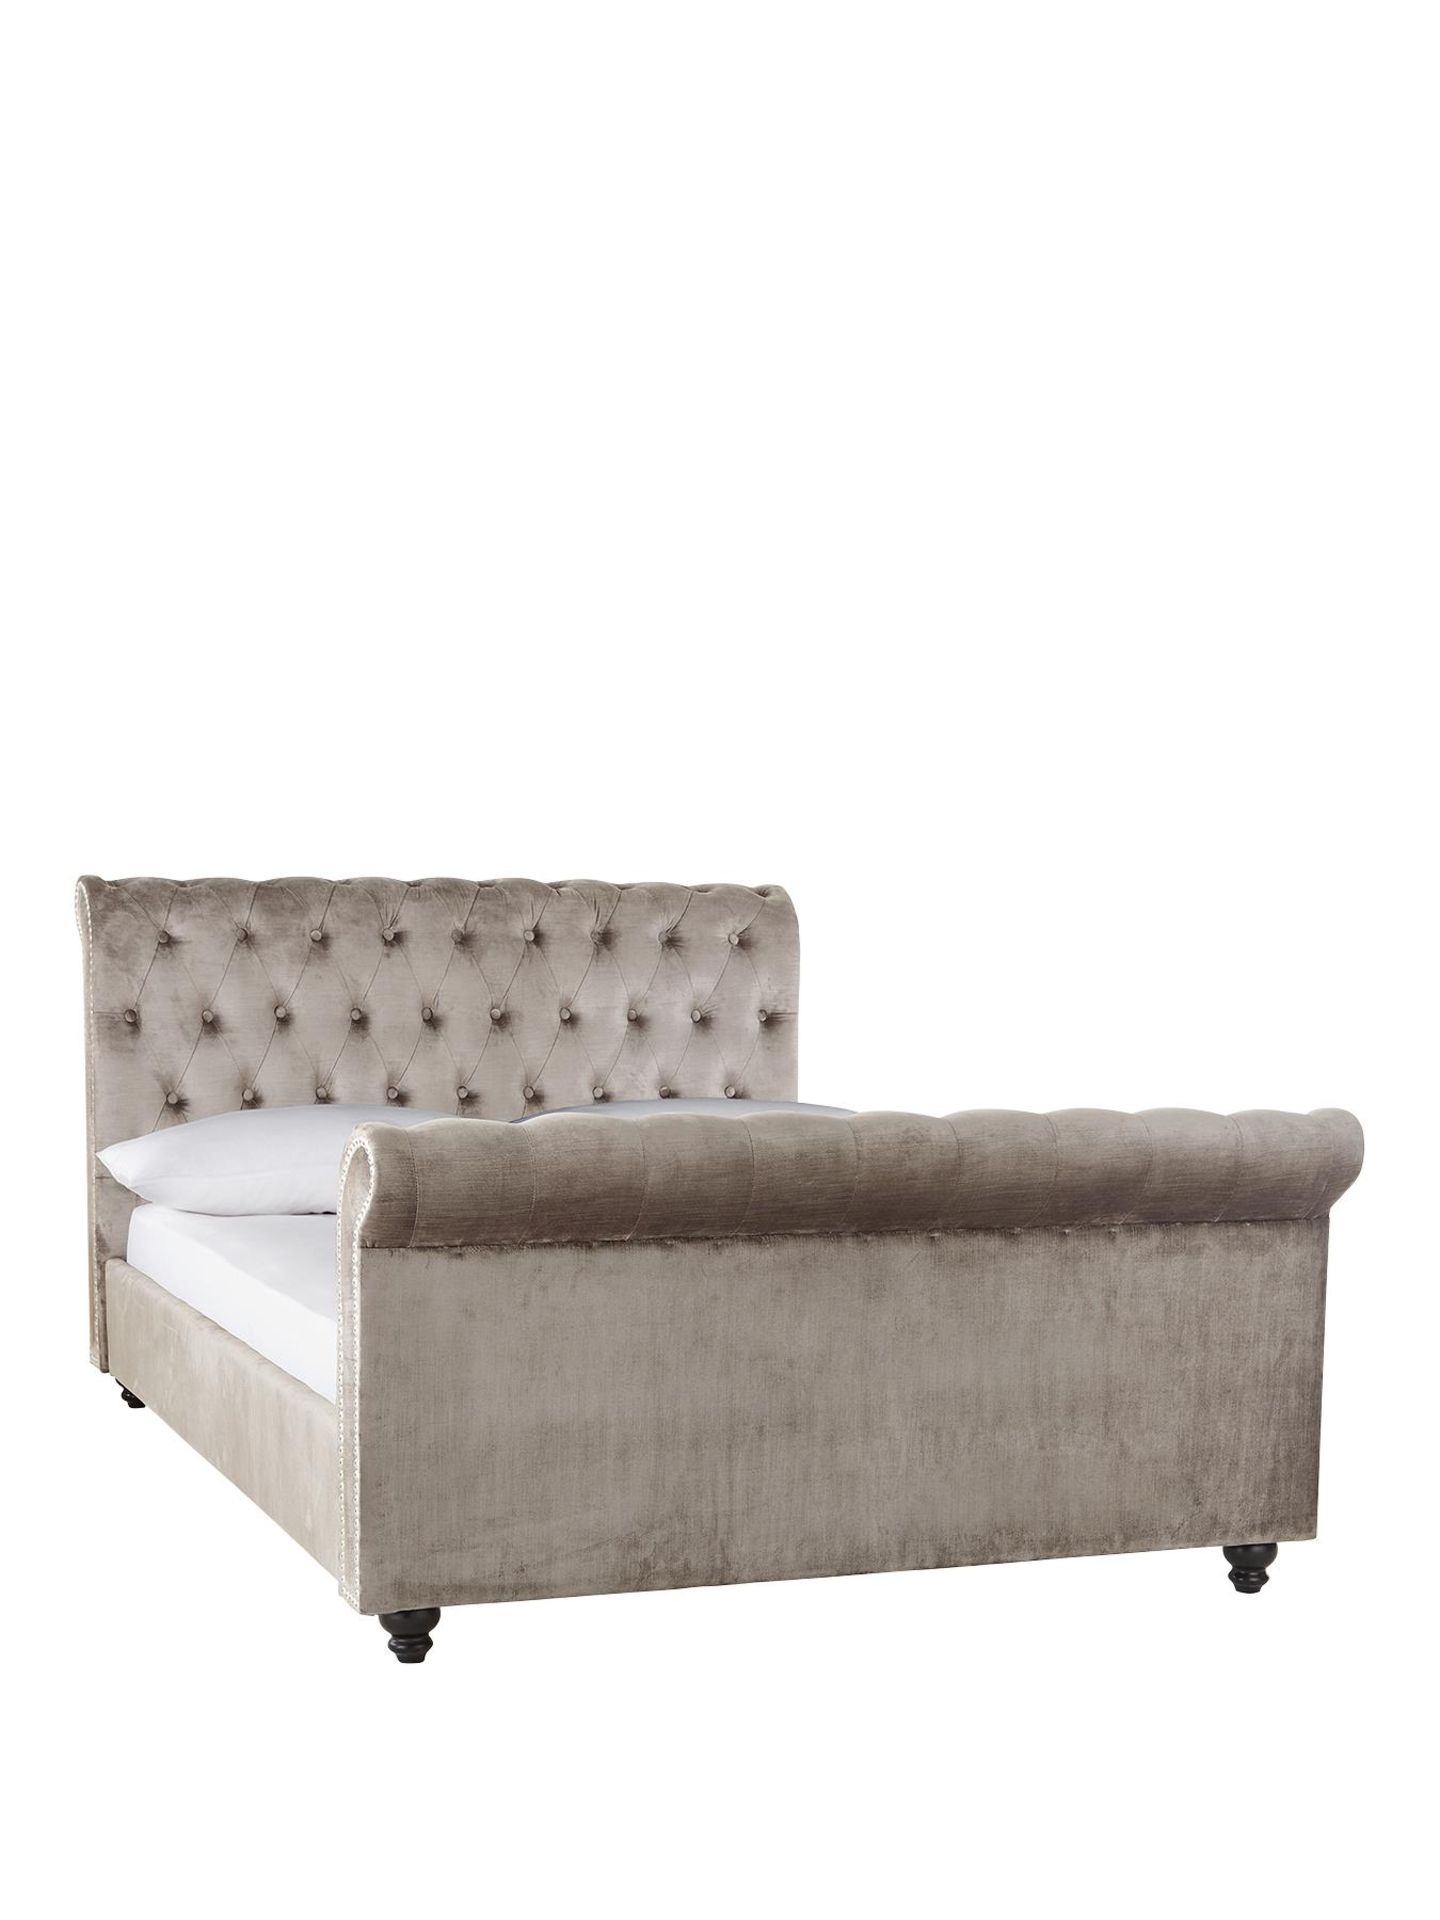 Boxed Item Woburn Super King Scroll Bed [Silver] 105X192X239Cm Rrp:¬£899